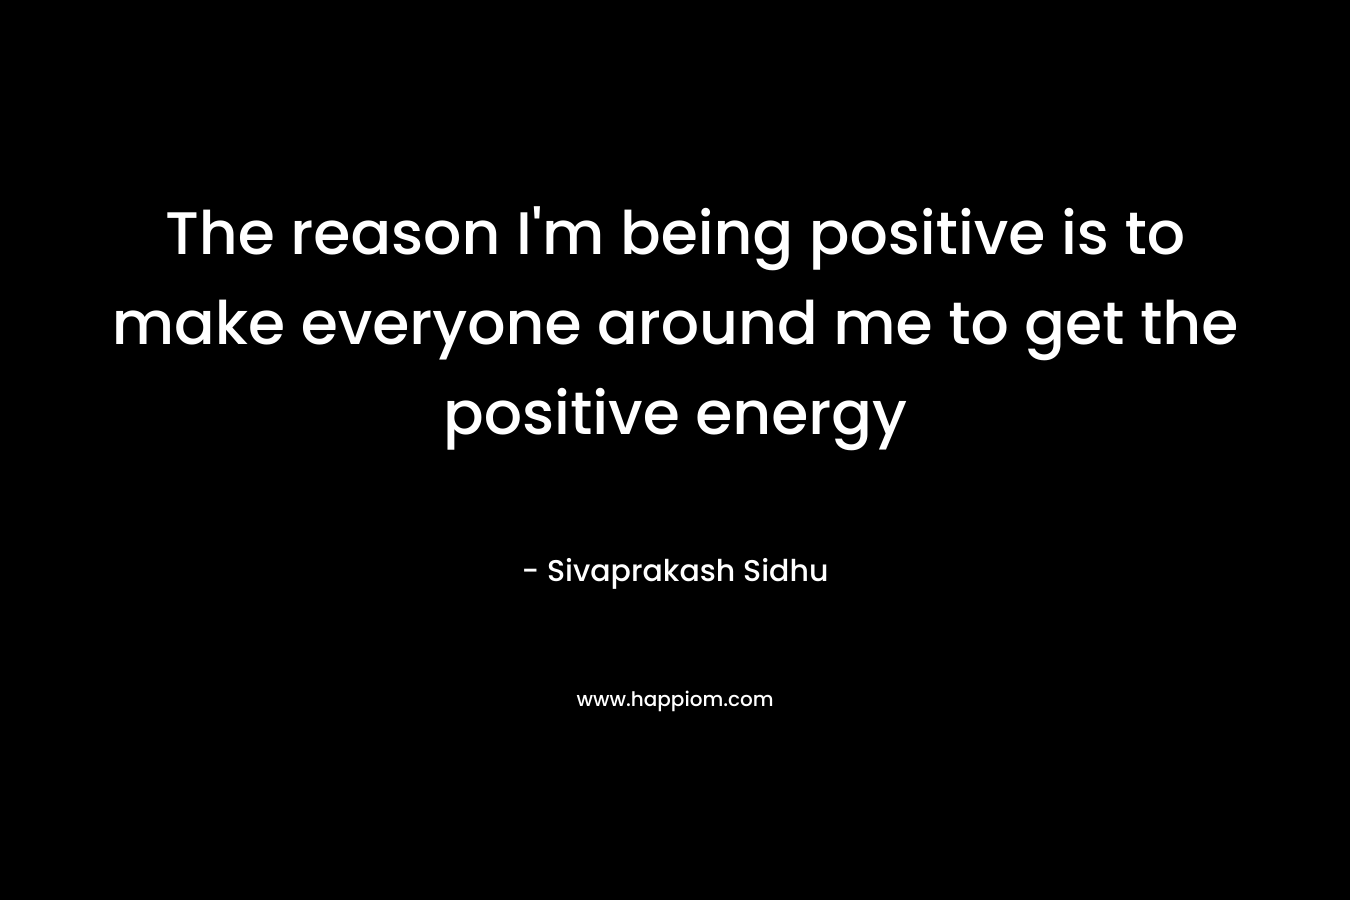 The reason I'm being positive is to make everyone around me to get the positive energy